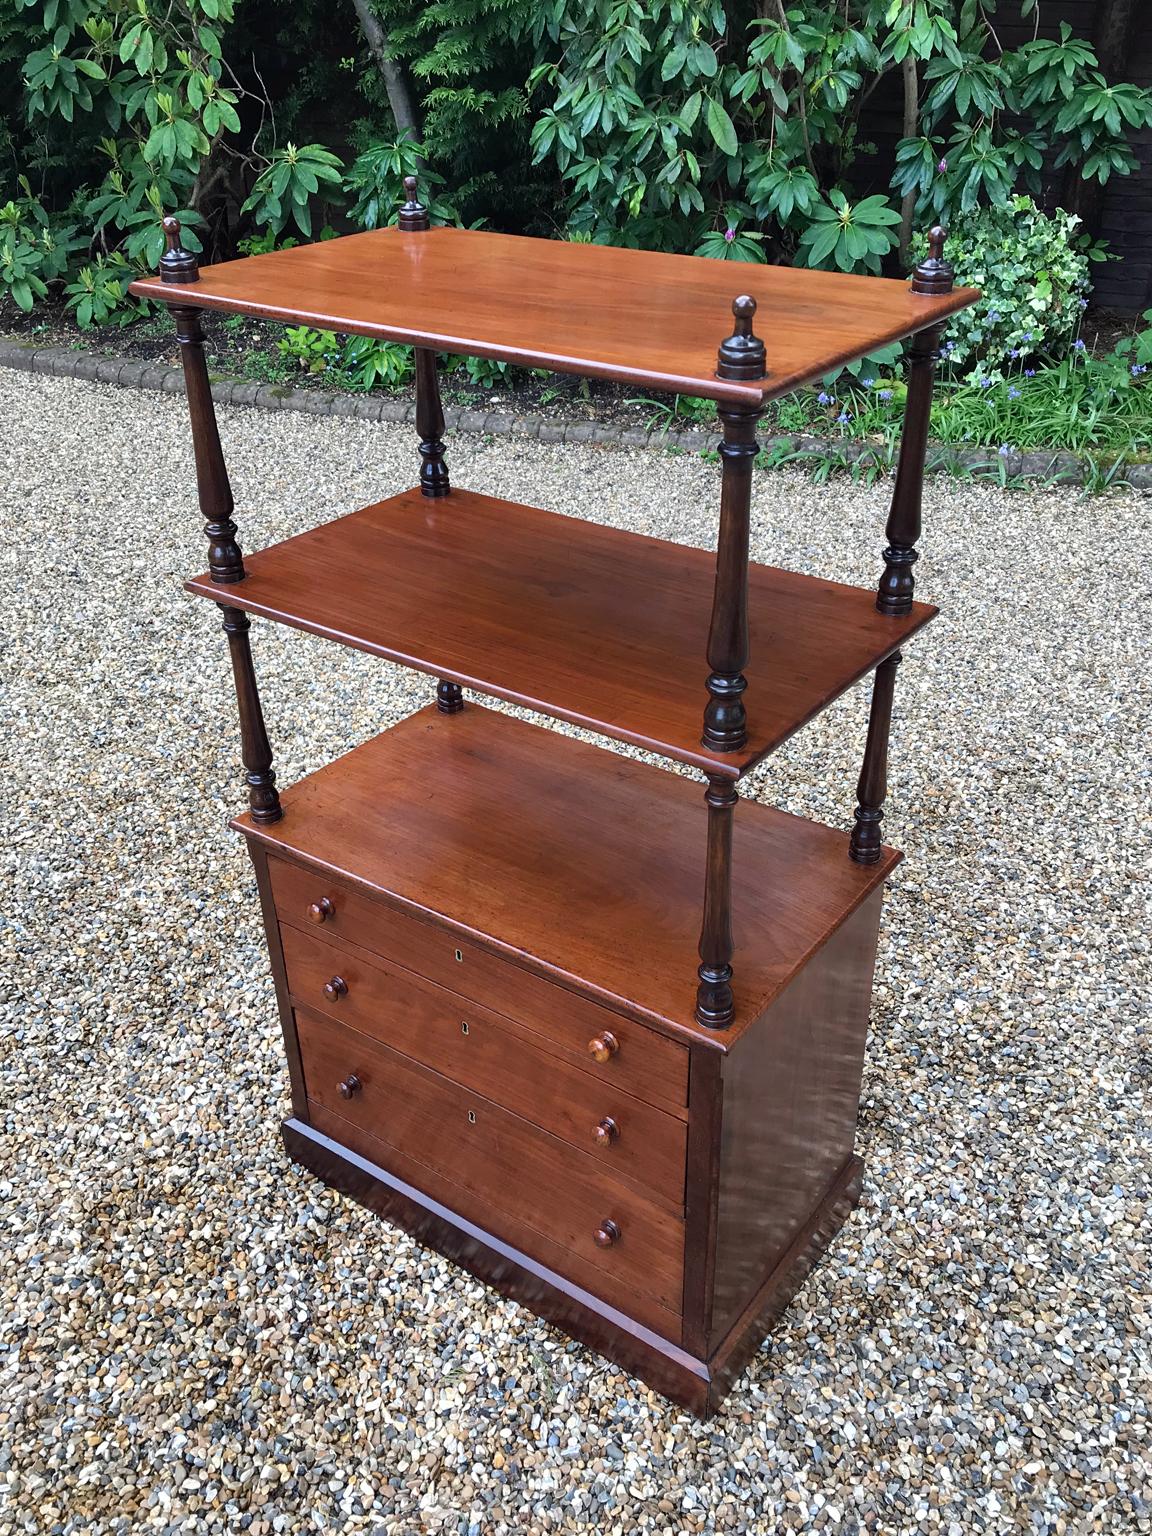 A very high quality 19th Century Victorian Mahogany Whatnot with 3 open shelves raised on turned columns and 3 mahogany lined drawers on plinth base and castors.

Circa: 1850 – 1860

Dimensions:
Width: 26 inches – 66 cms
Height: 44.5 inches –